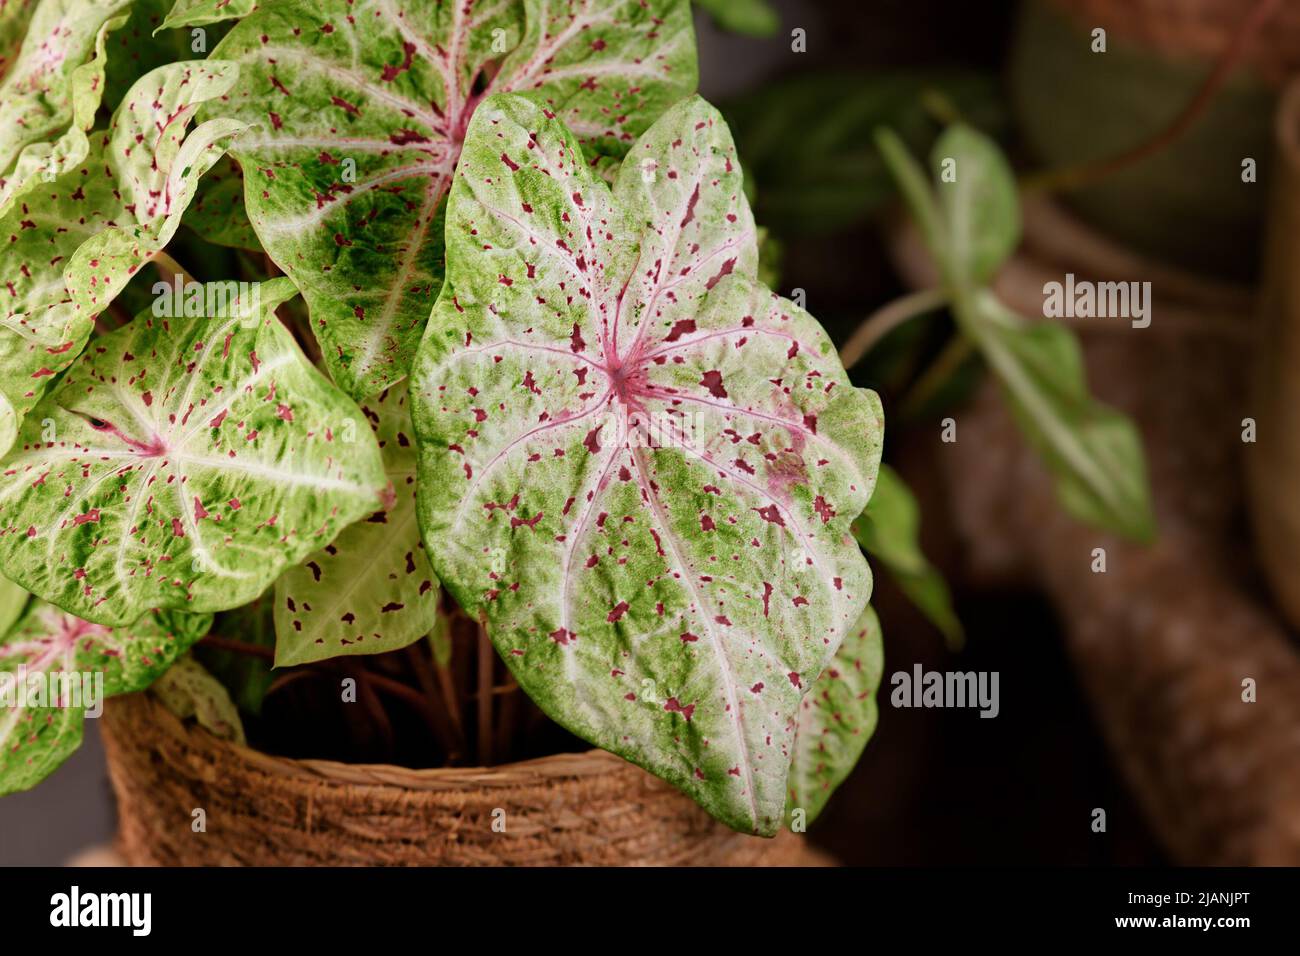 Leaf of 'Caladium Miss Muffet' houseplant with pink and green leaves with red dots Stock Photo